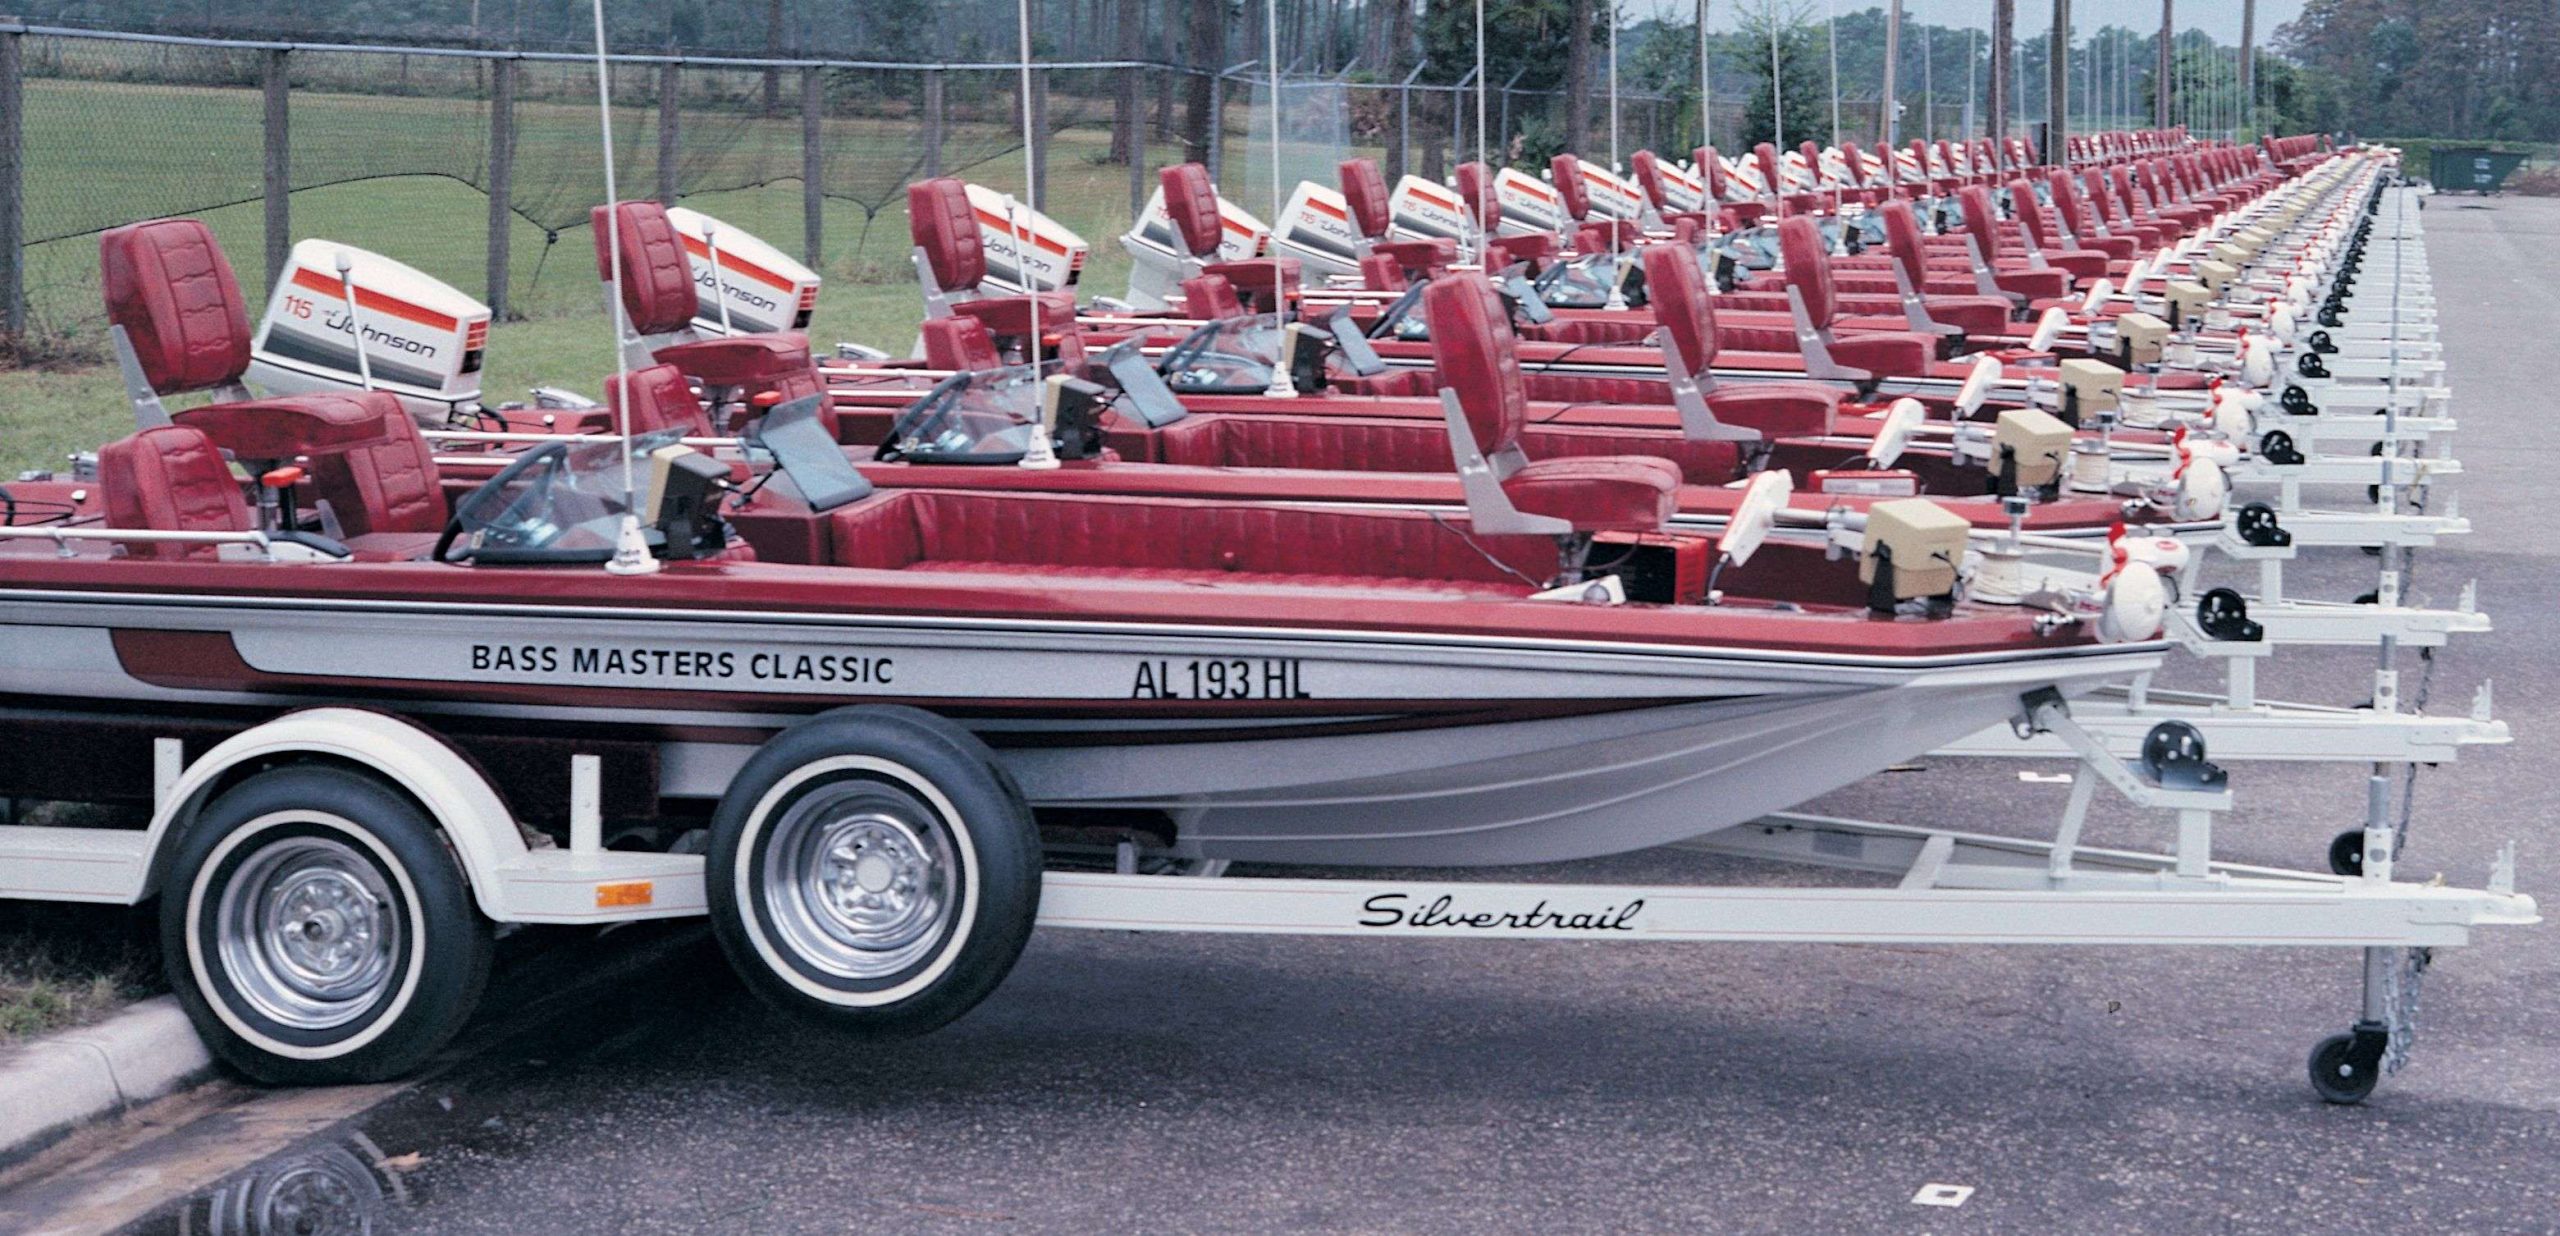 The Classic location was a mystery in the early years. The boats were transported by truck to the Classic lake at night to keep the location veiled in secrecy. That ended in 1977 when the Classic location was announced ahead of time so fans could attend the event. 